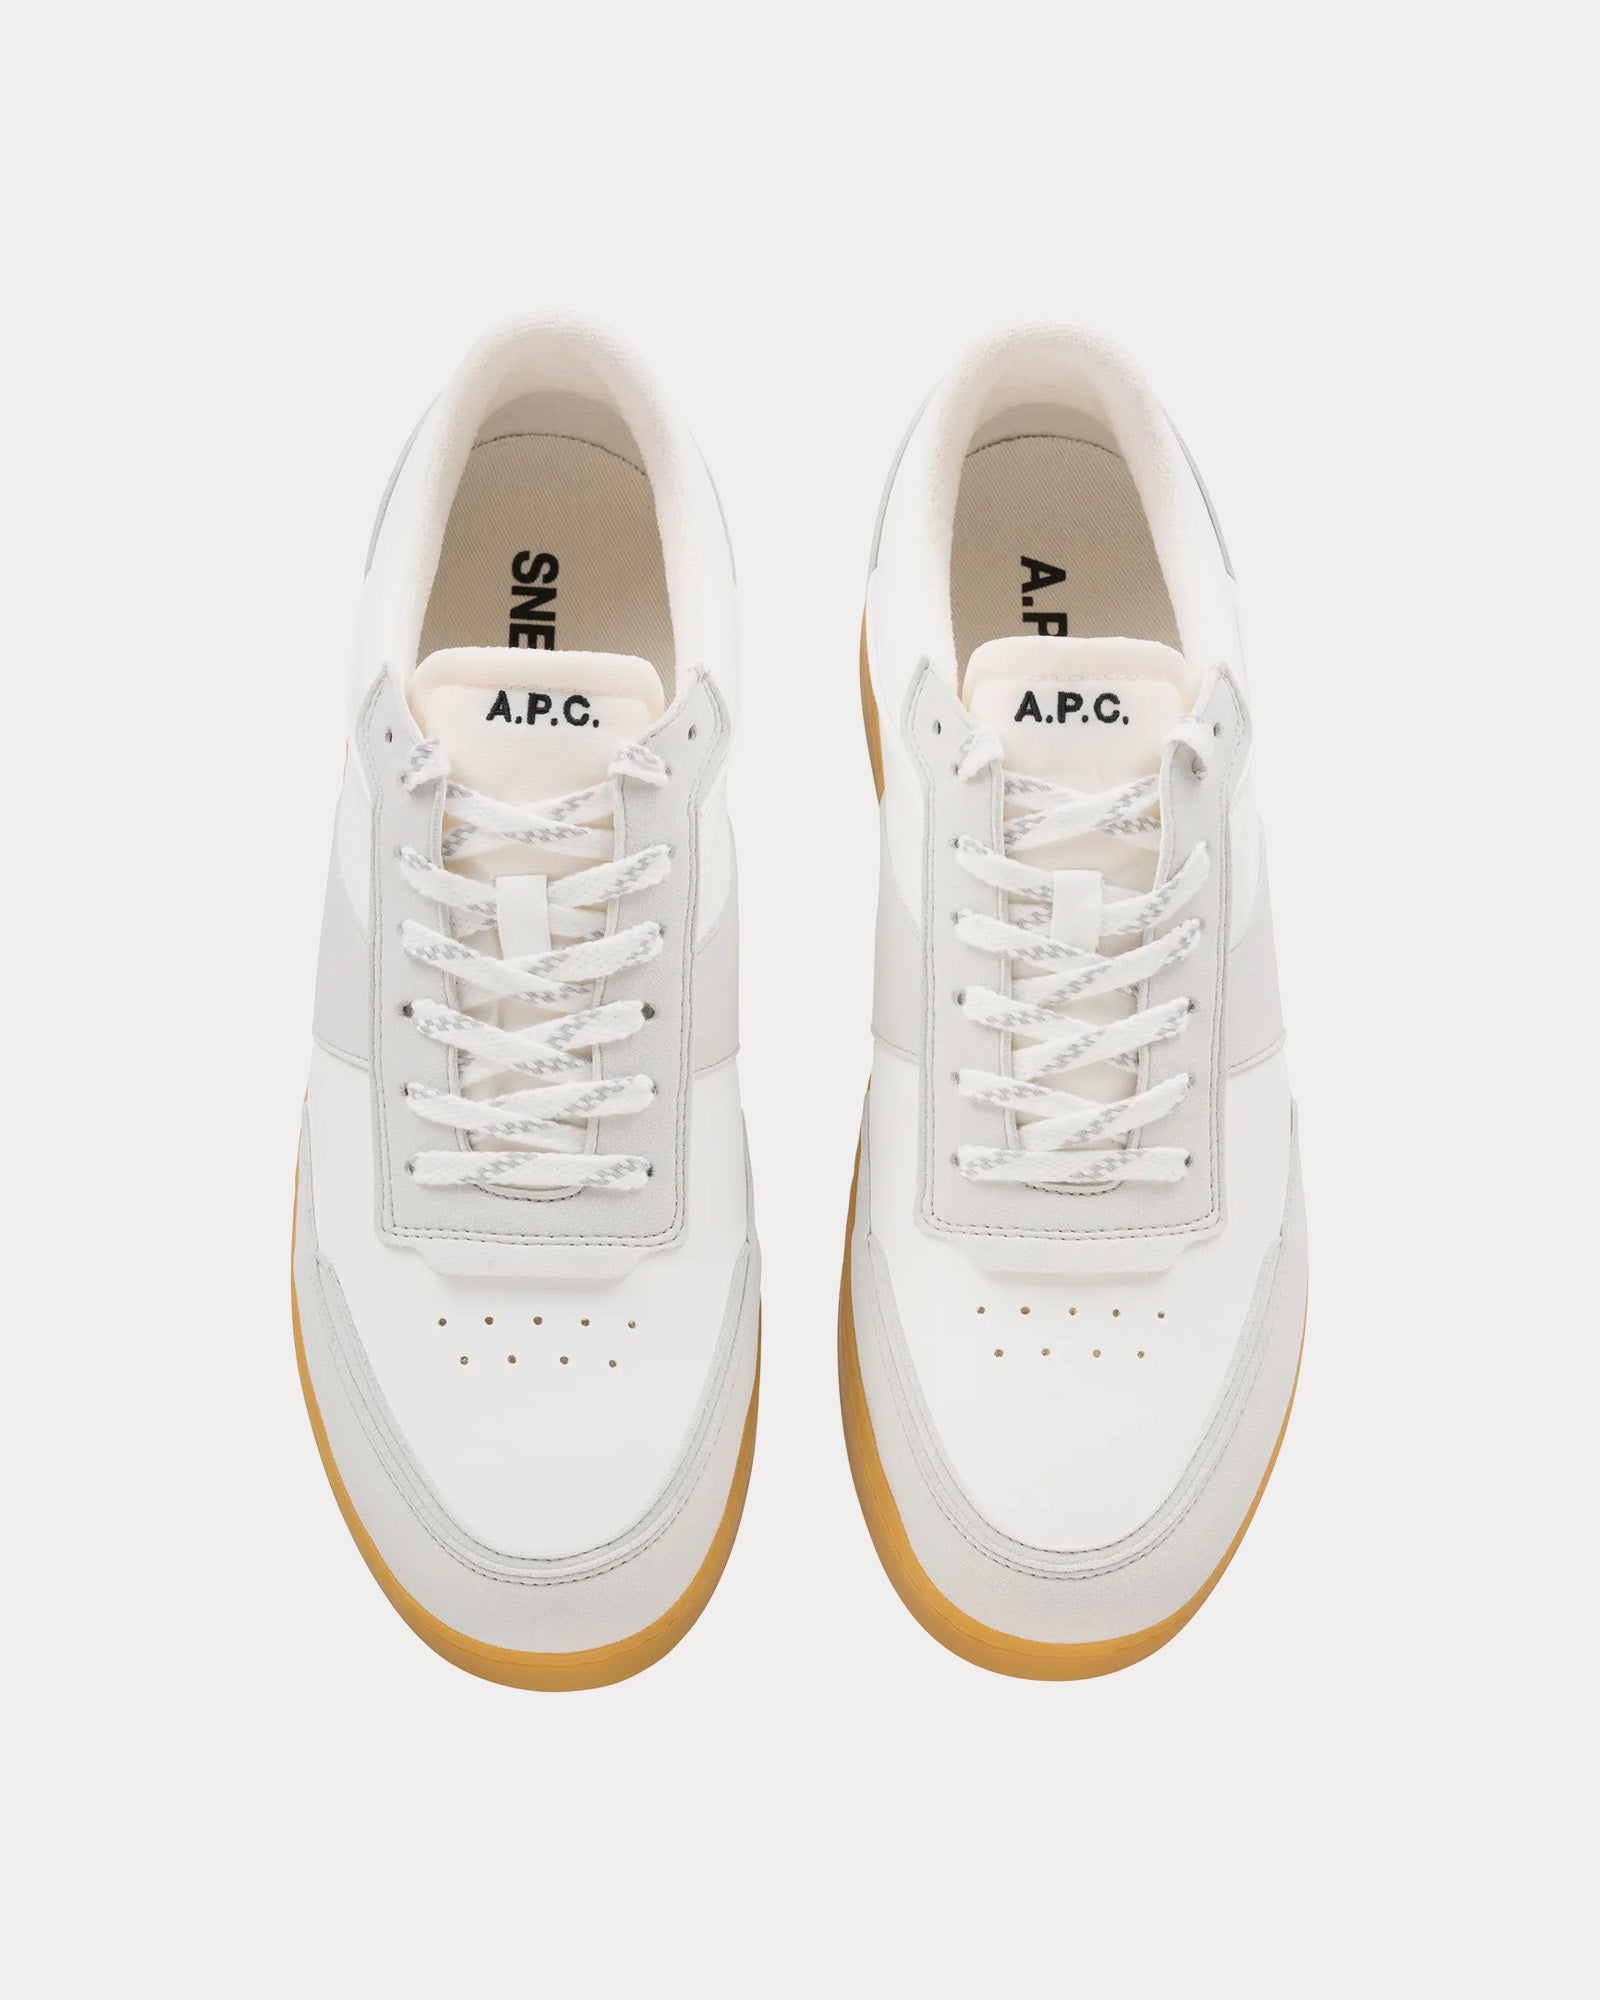 A.P.C. - Plain White / Natural Low Top Sneakers